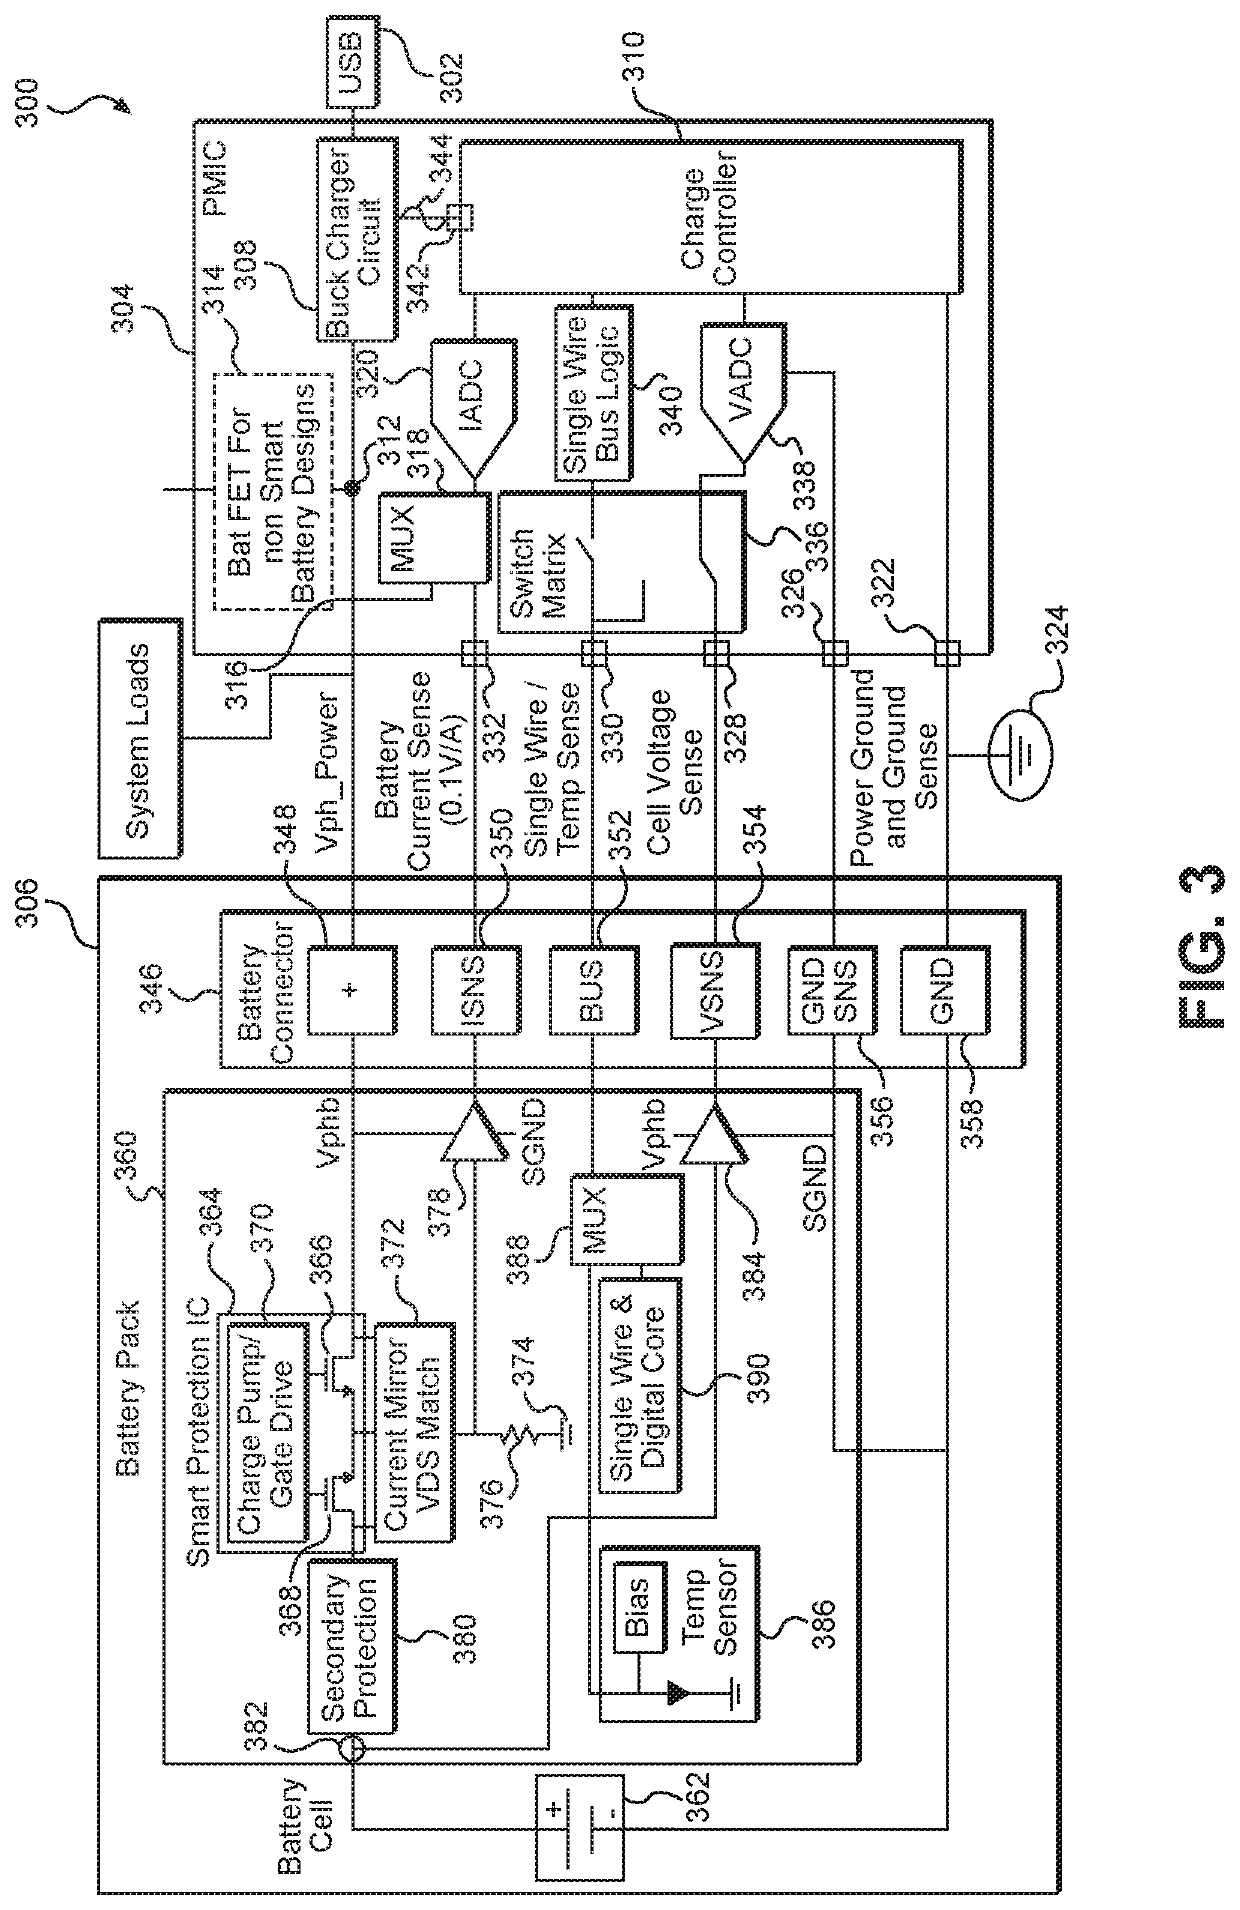 Systems and methods for reuse of battery pack-side current and voltage sensing